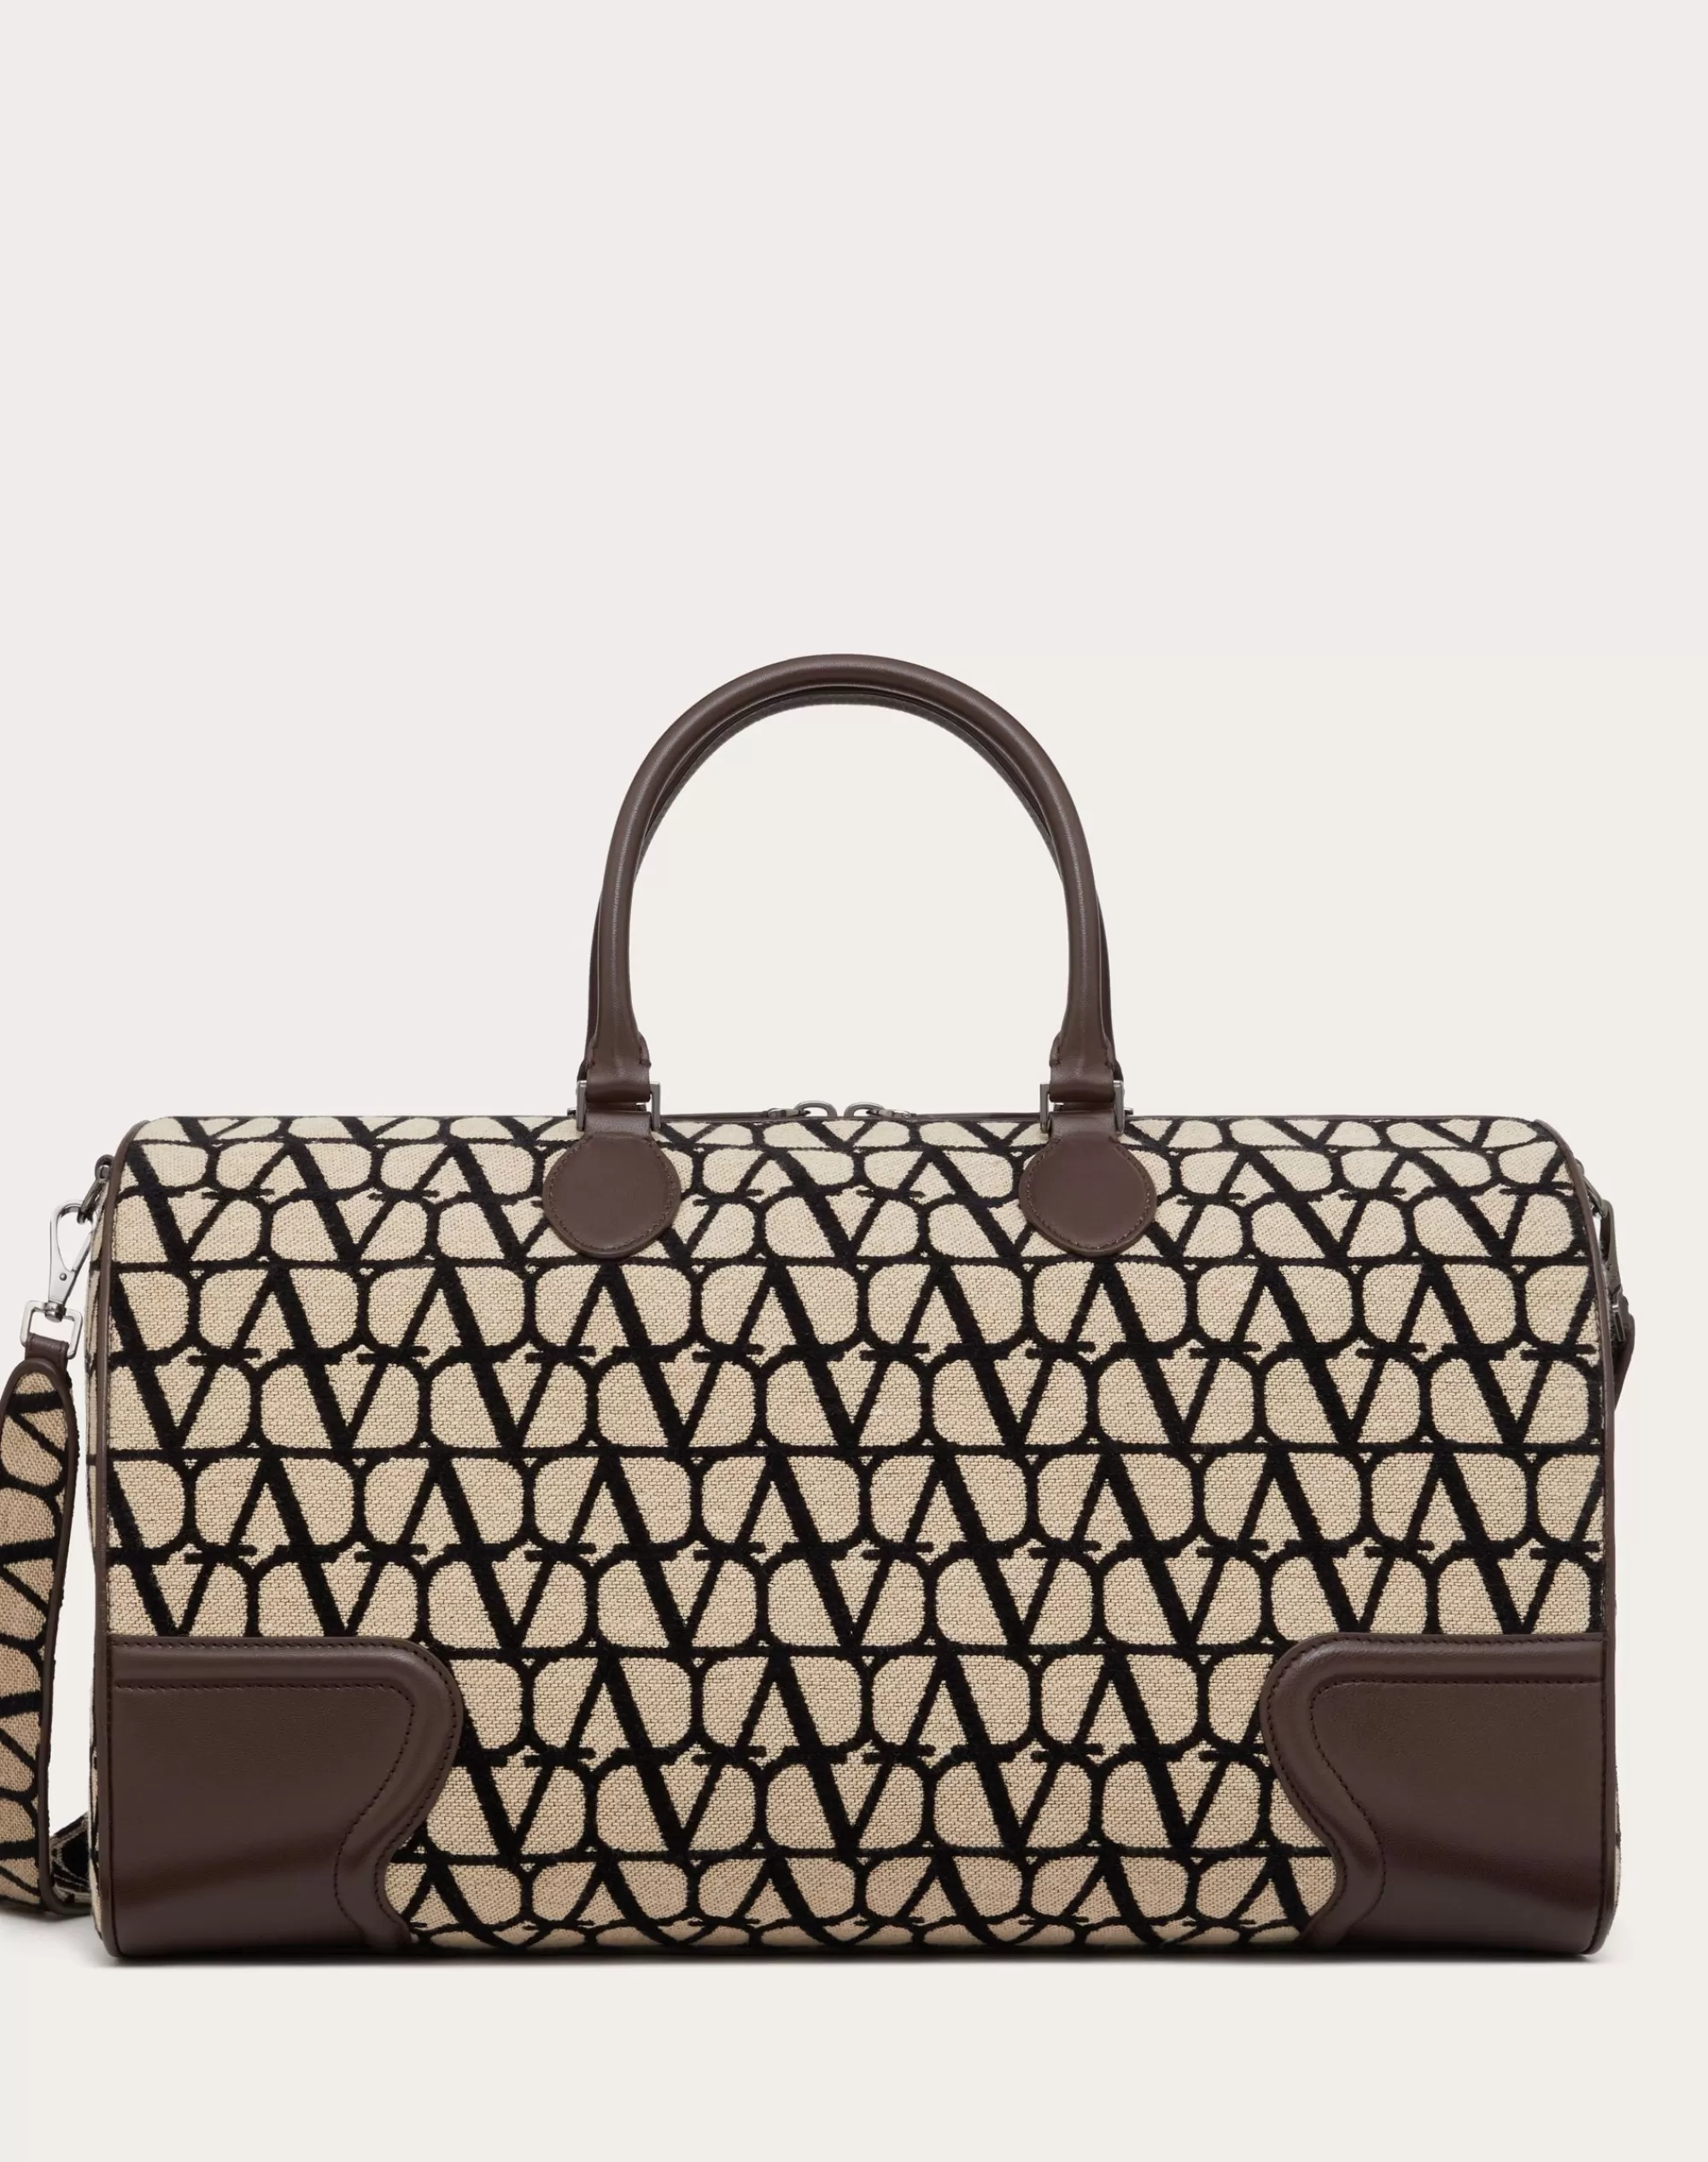 Valentino TOILE ICONOGRAPHE DUFFLE BAG WITH LEATHER DETAILING Beige/black Best